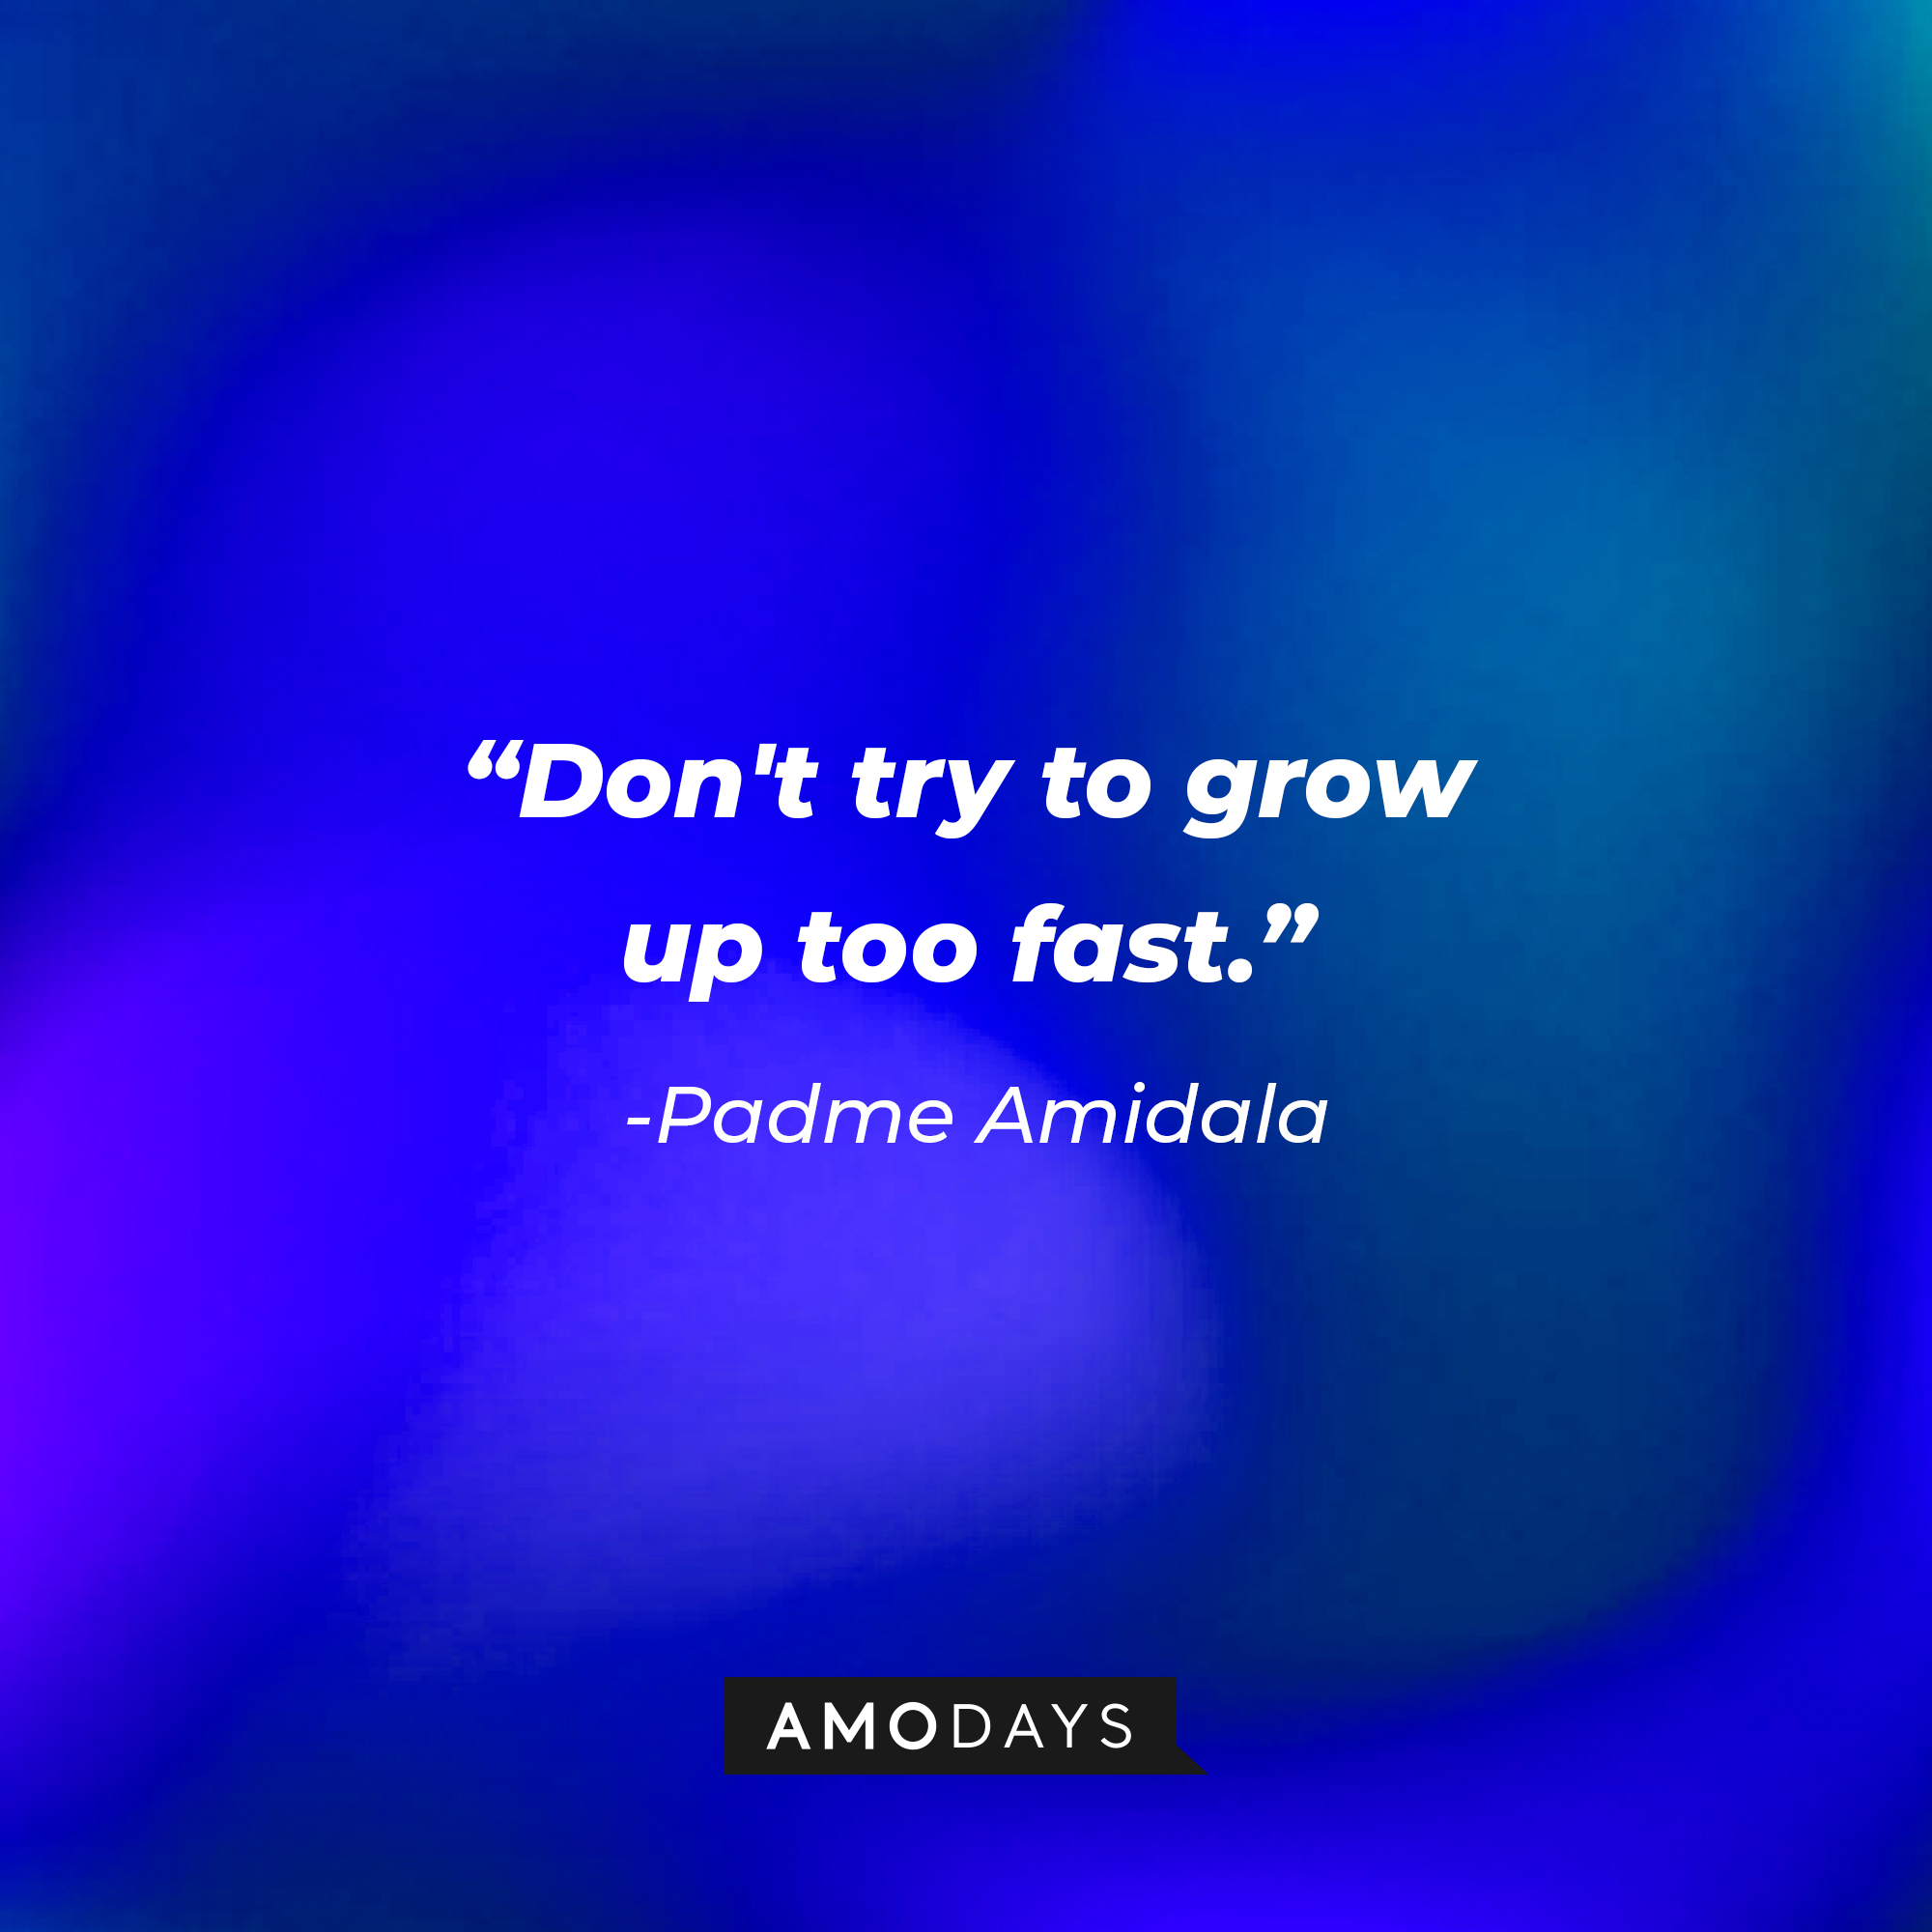 Padme Amidala's quote: "Don't try to grow up too fast." | Source: AmoDays